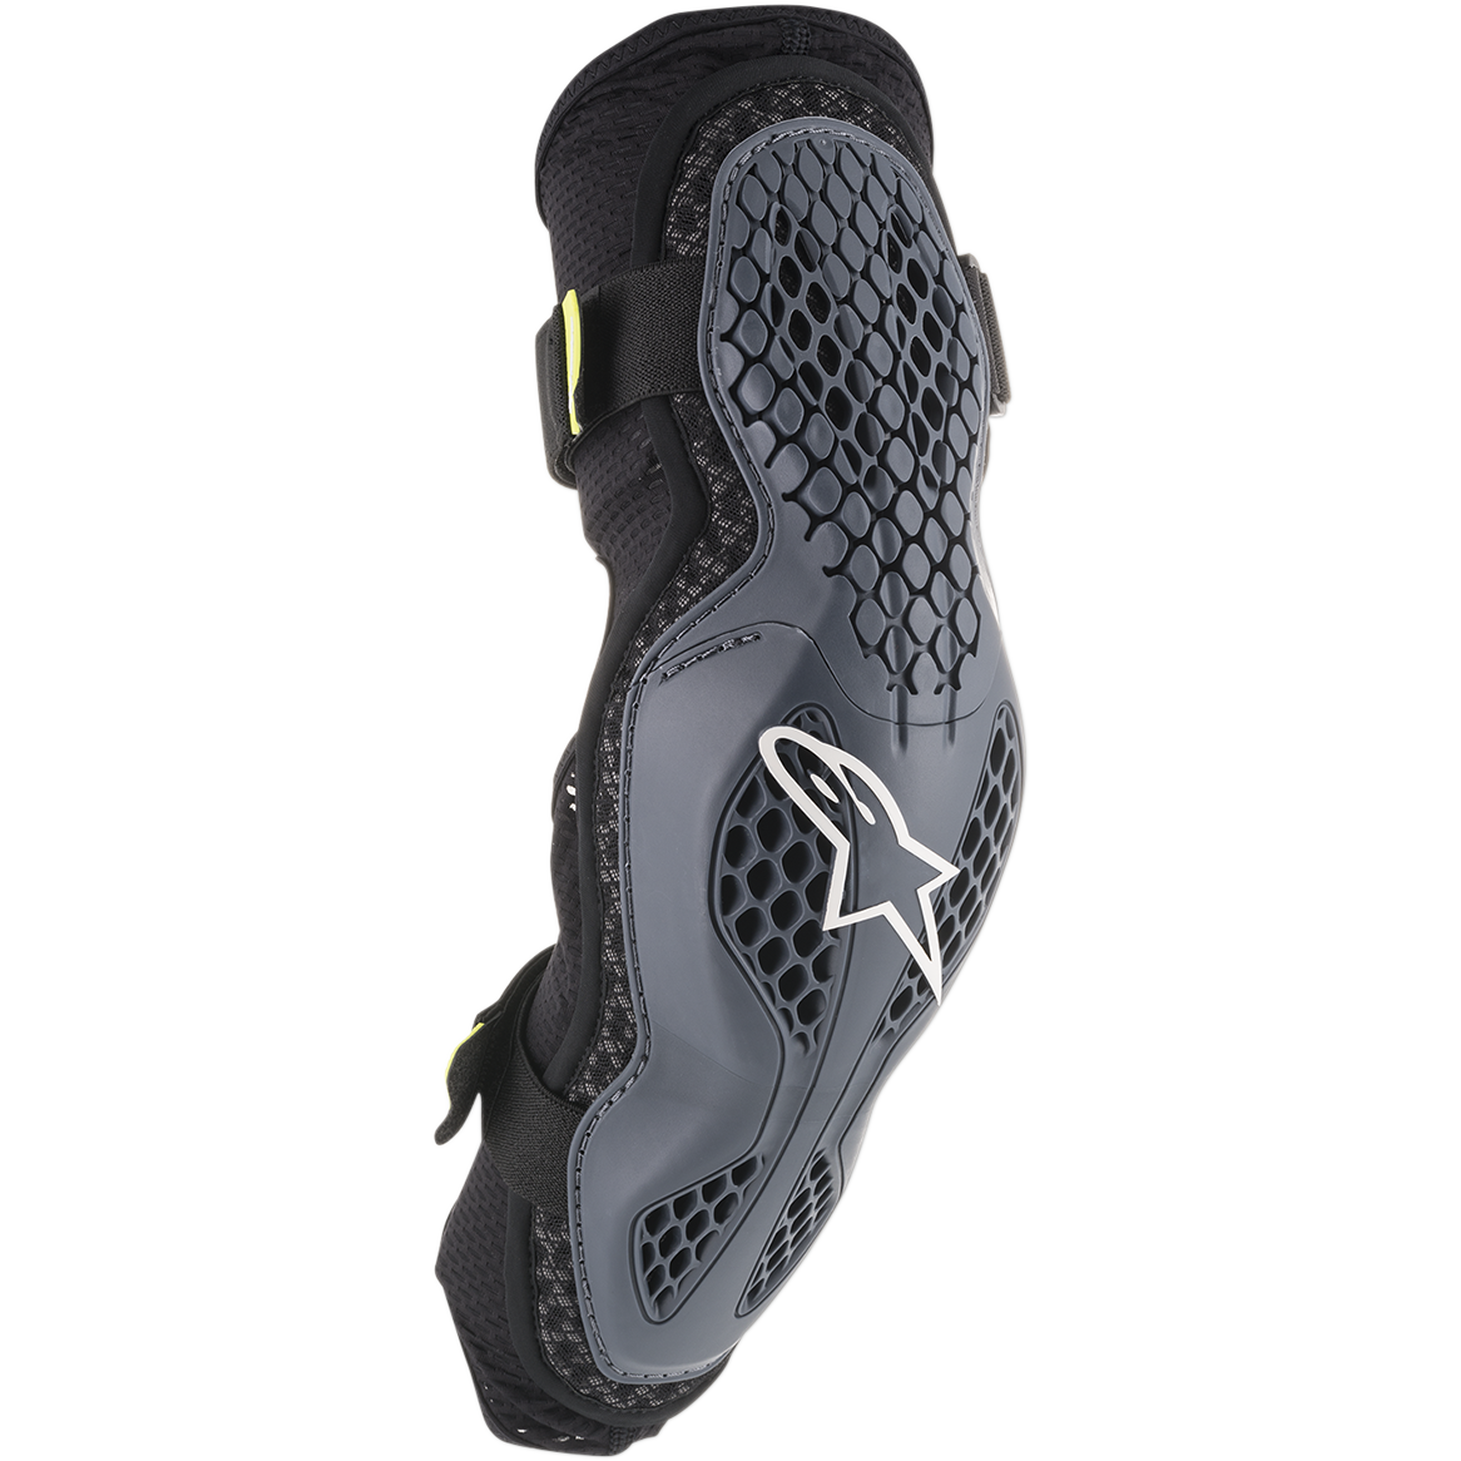 Protections de coude Sequence ALPINESTARS